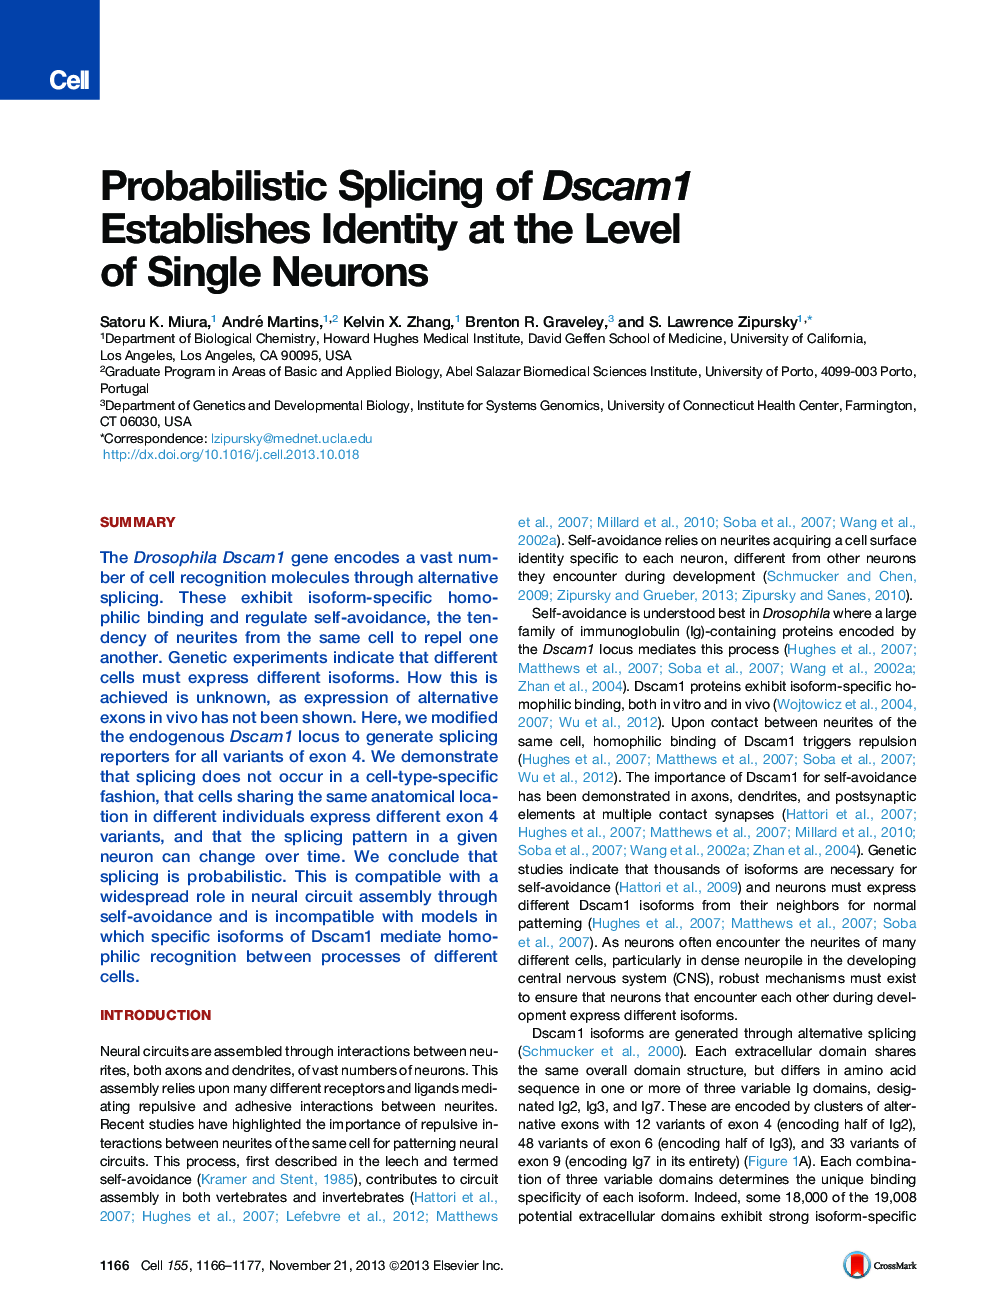 Probabilistic Splicing of Dscam1 Establishes Identity at the Level of Single Neurons